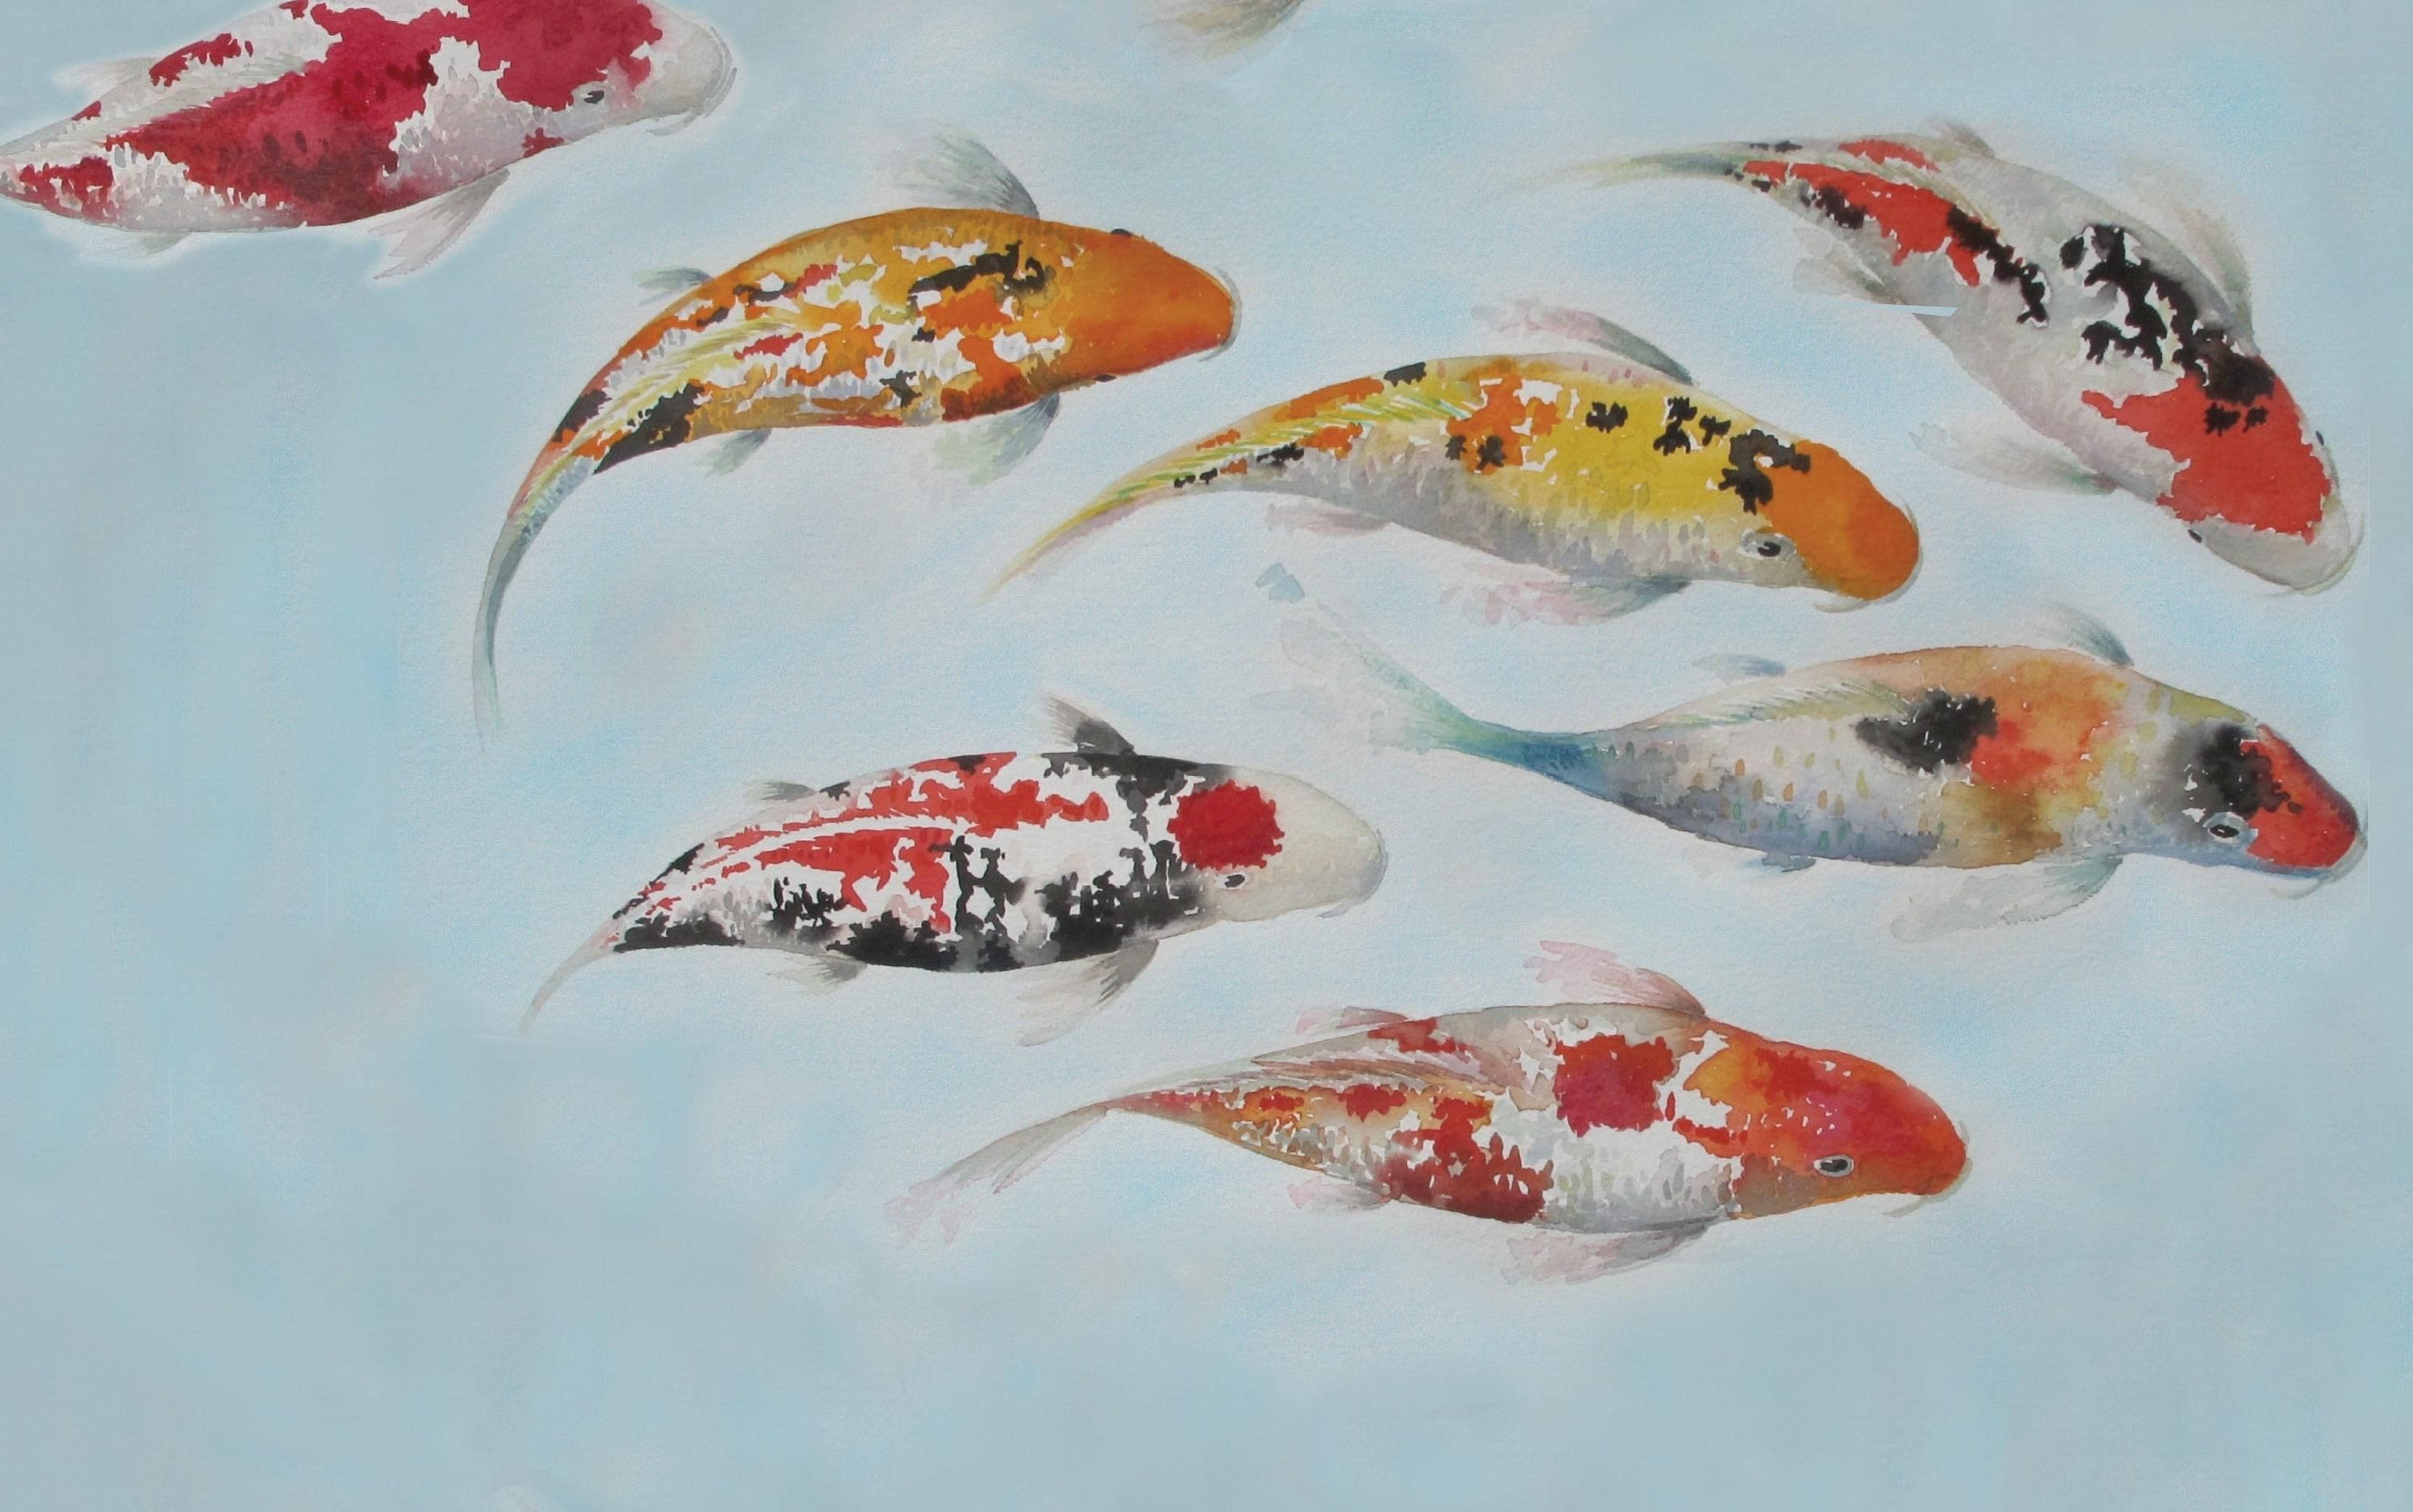 A painting of several koi fish swimming in the water - Koi fish